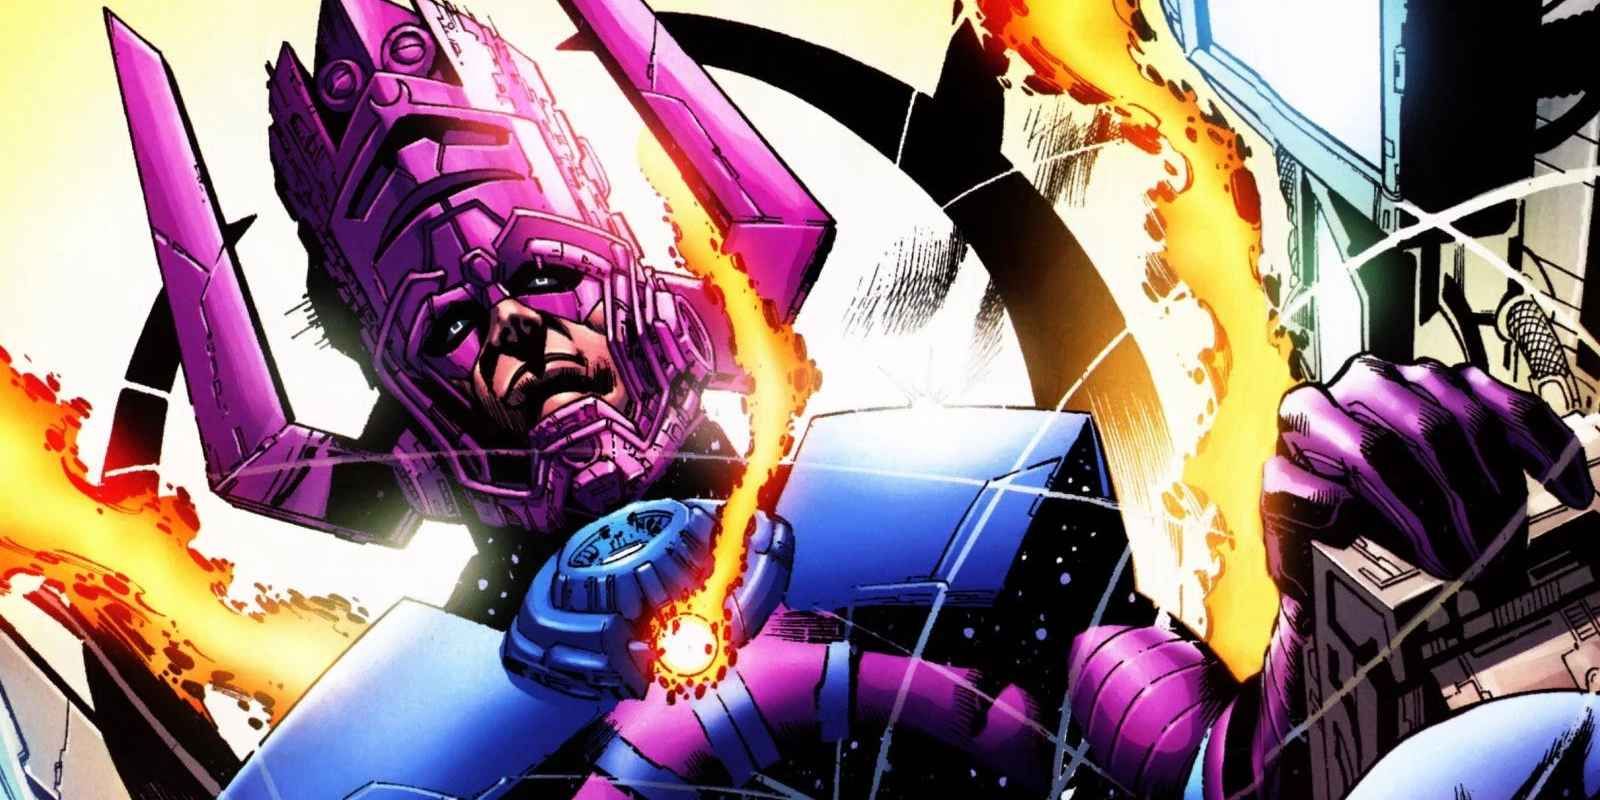 Galactus in his classic form, with flames coming out of him, in artwork from Marvel Comics